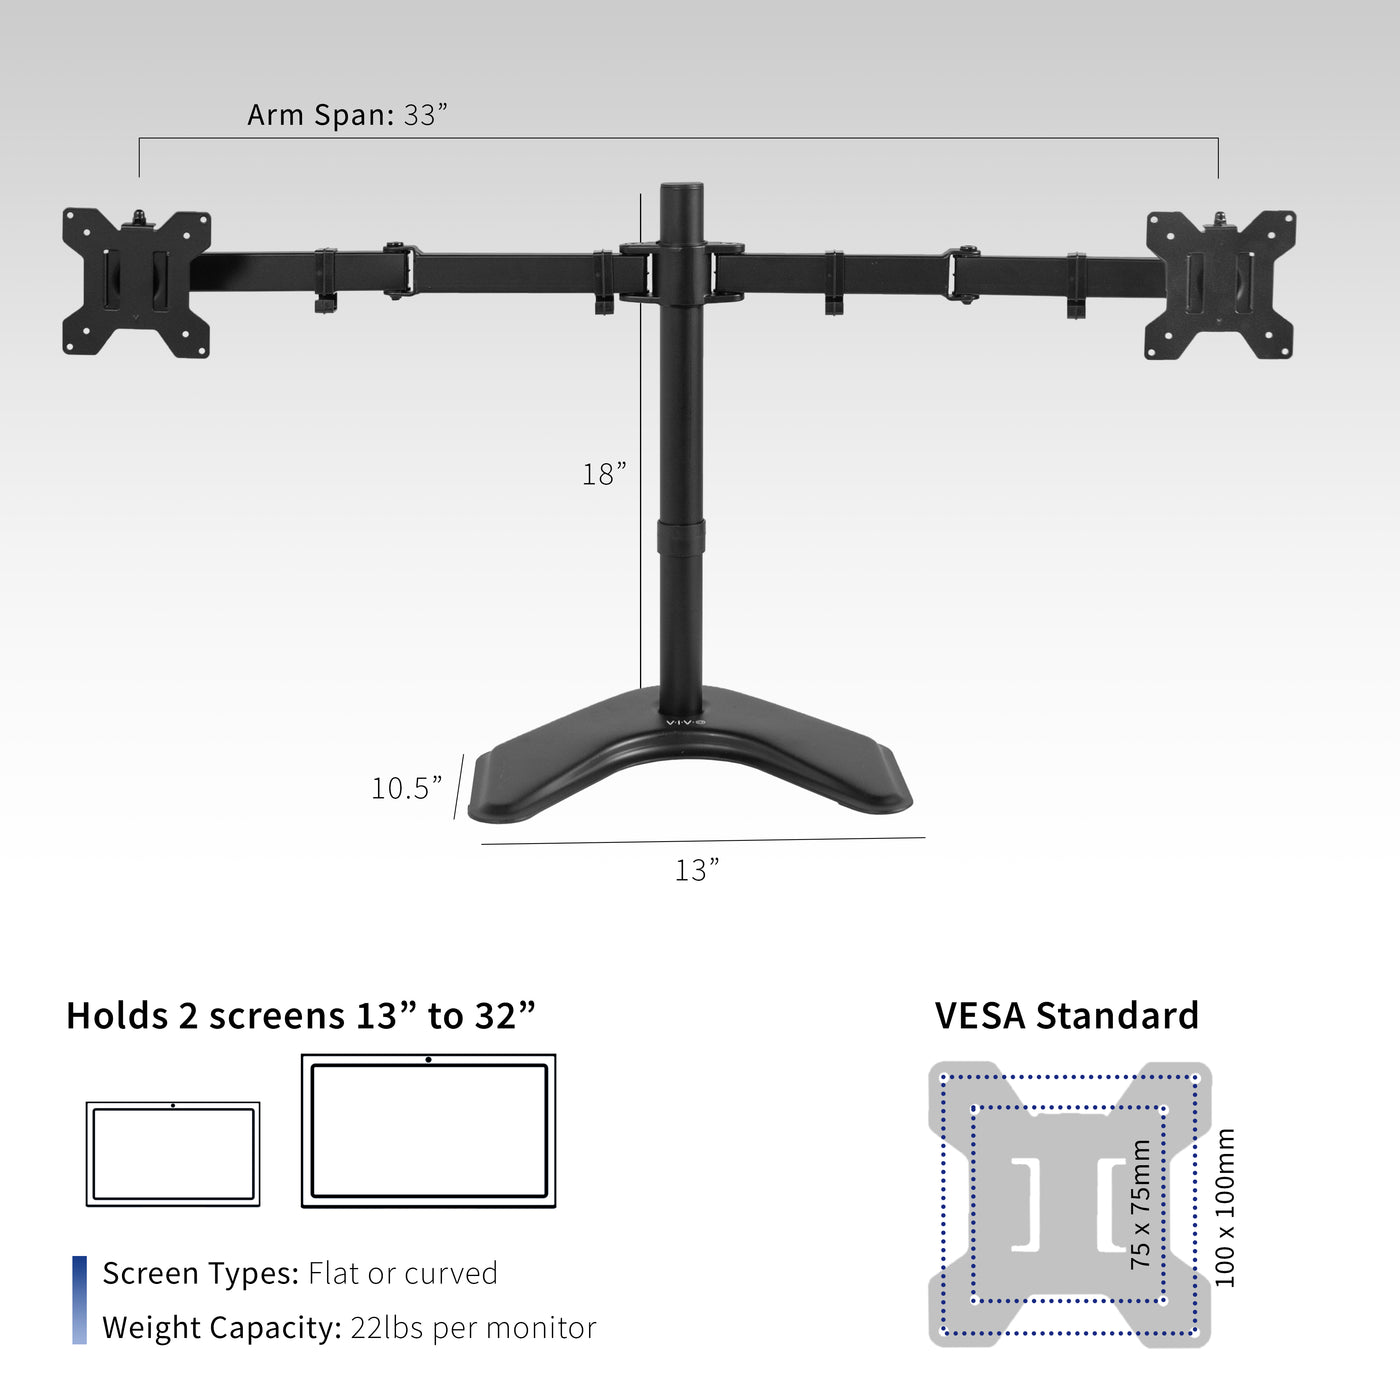 Make sure the monitors do not extend past the center of the base to ensure balance.